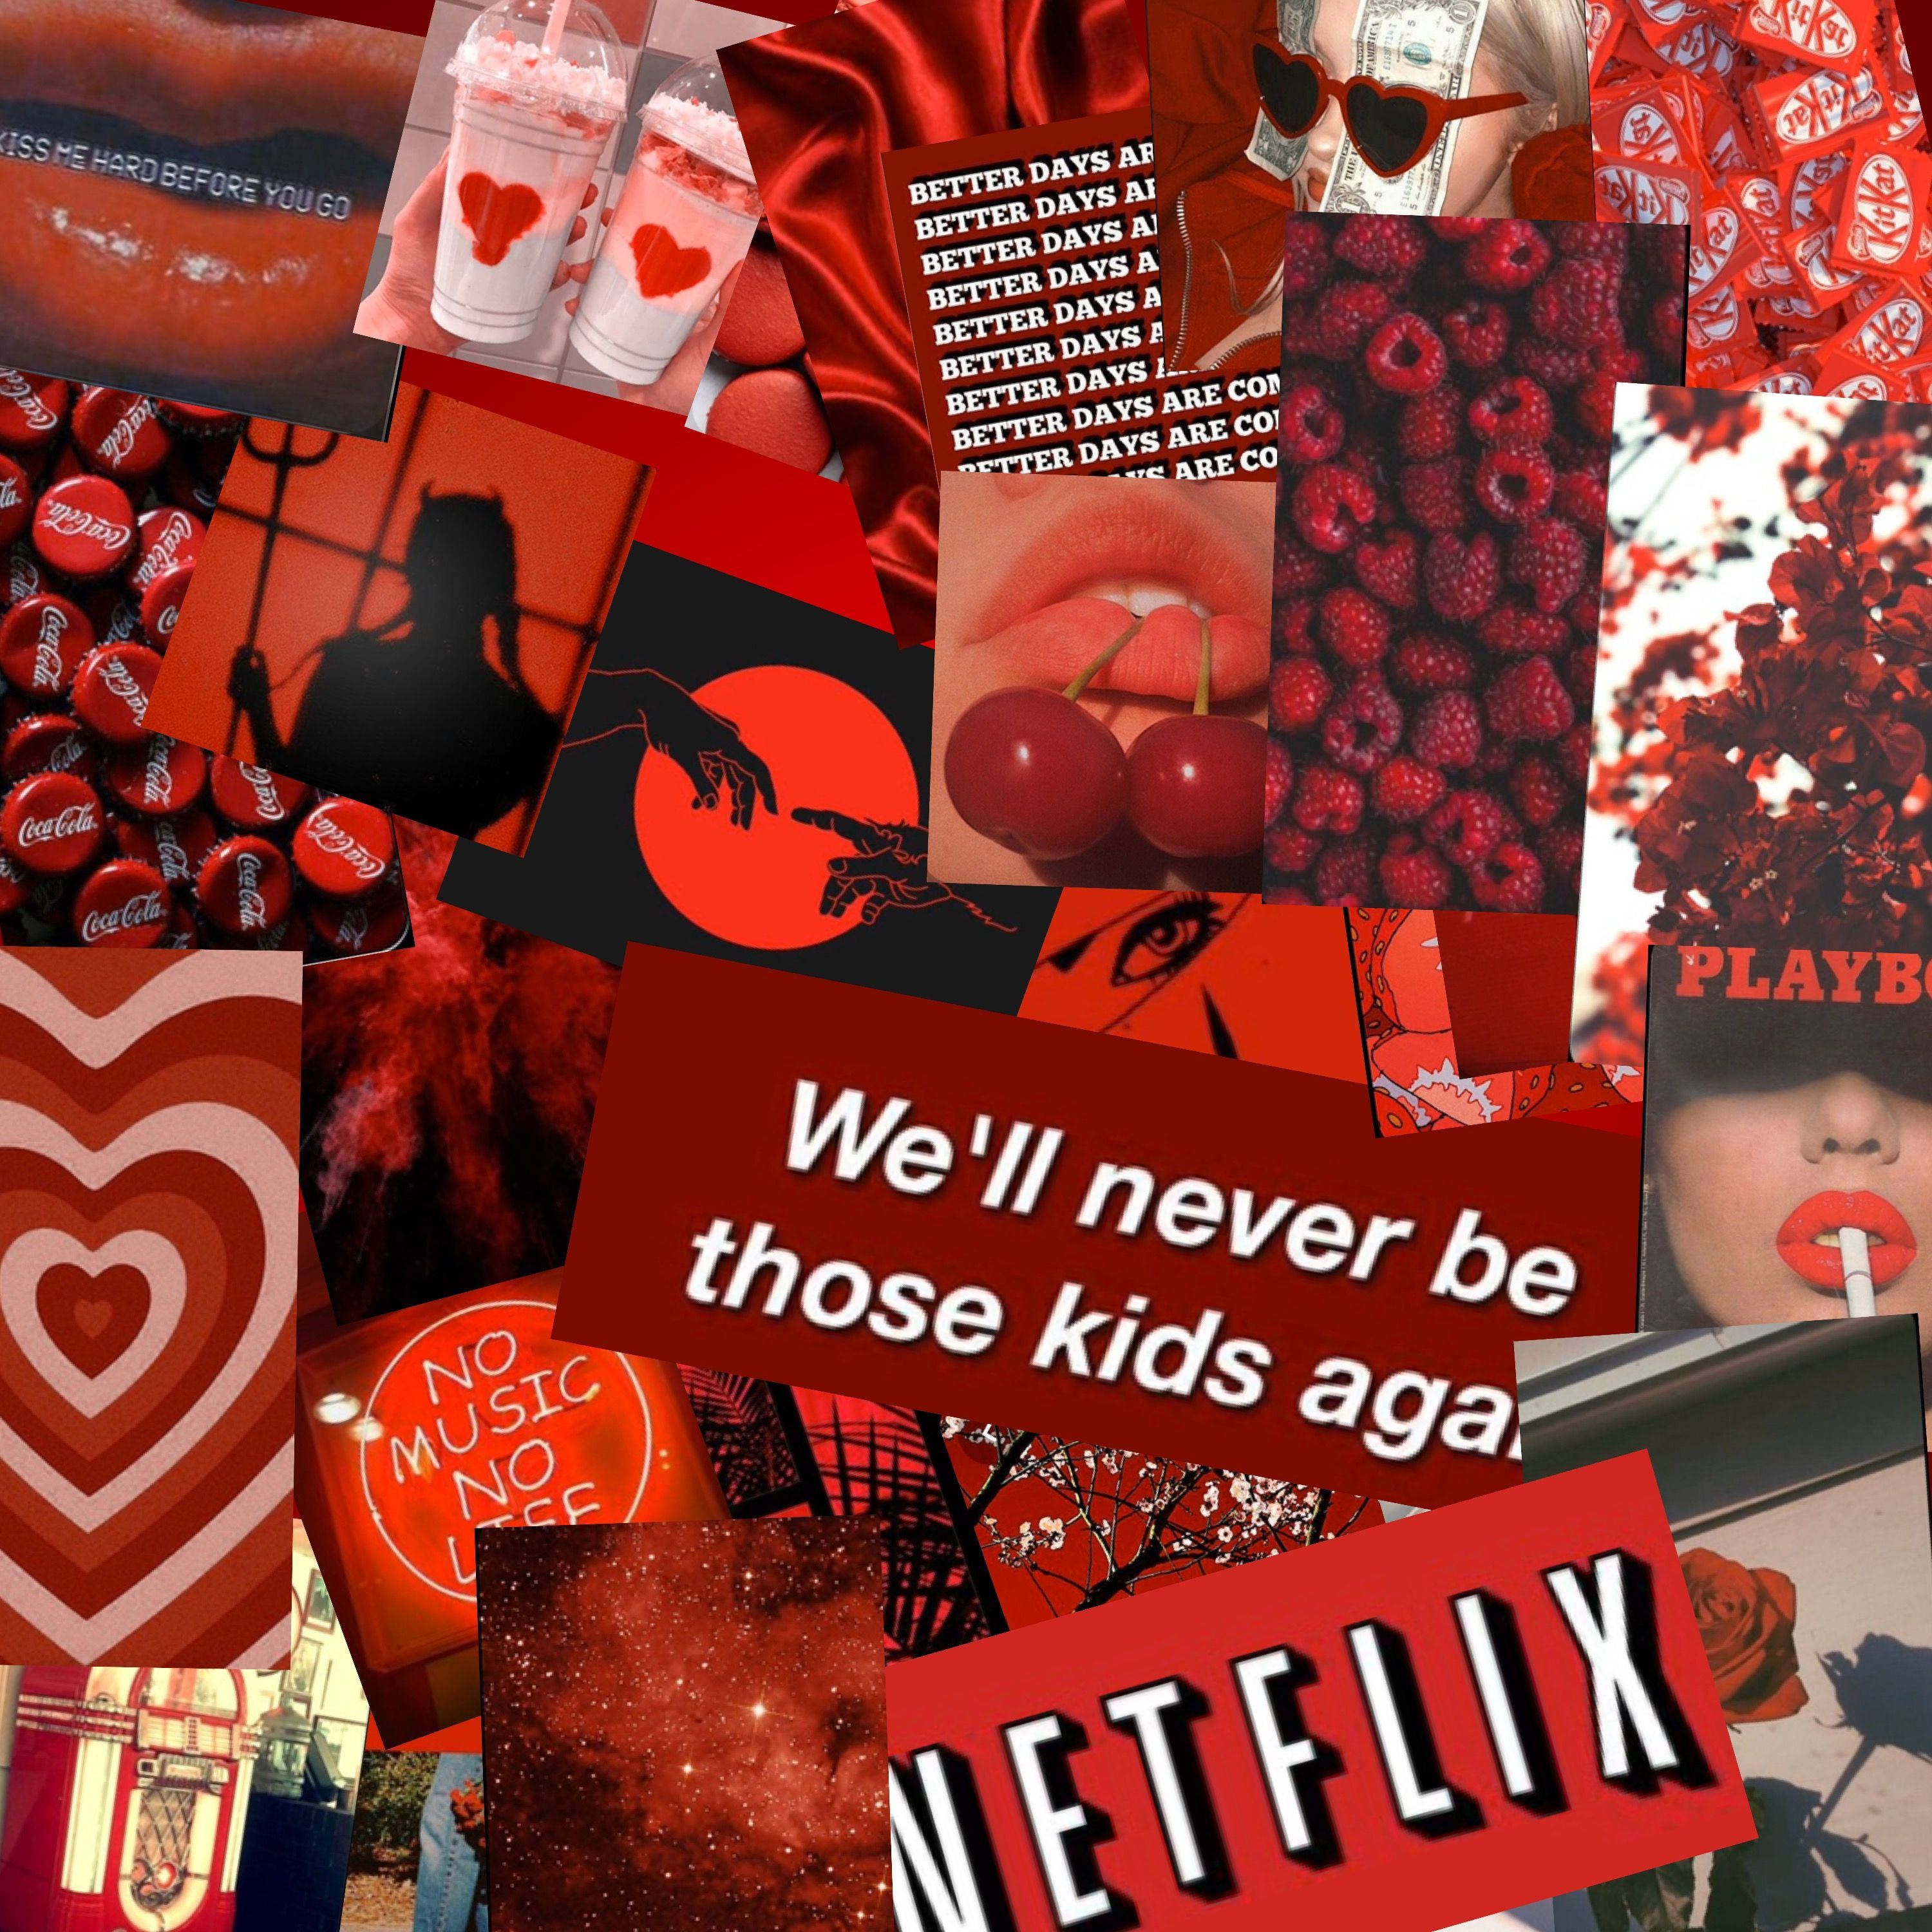 A collage of red and black aesthetic pictures with a Netflix logo. - Netflix